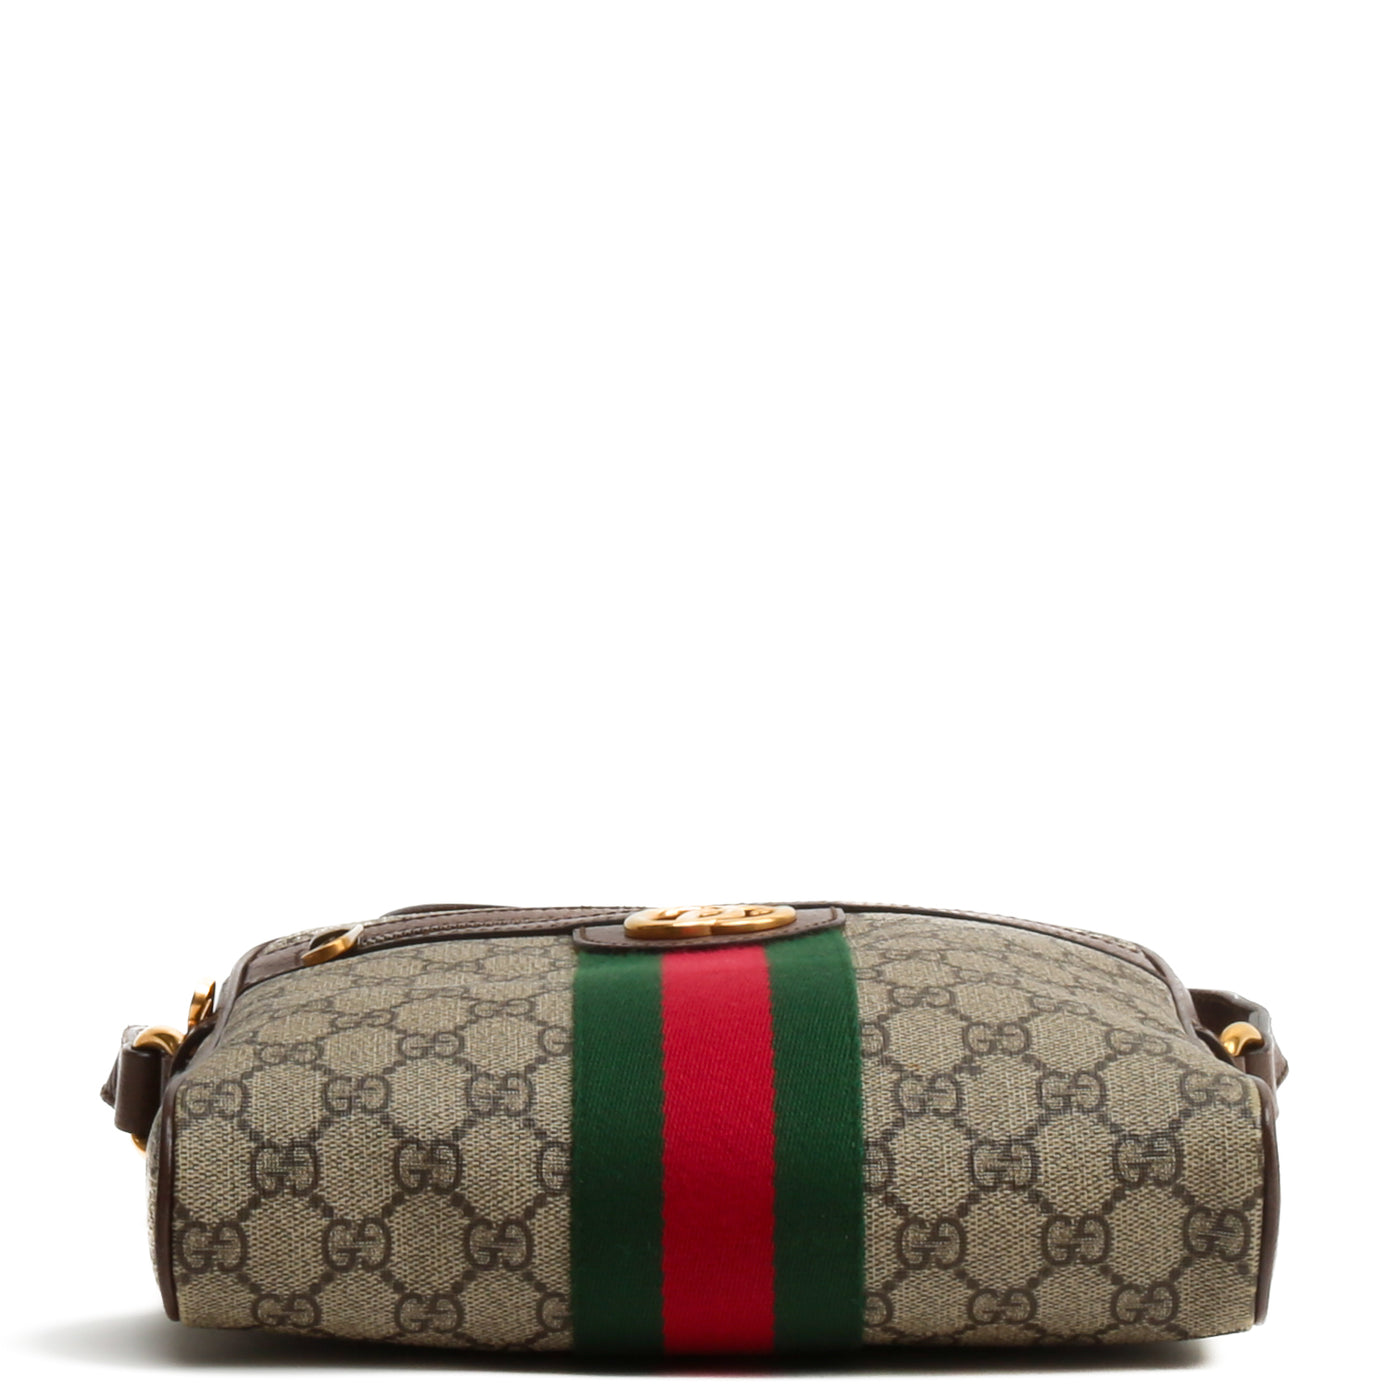 GUCCI Ophidia GG Small Messenger Bag